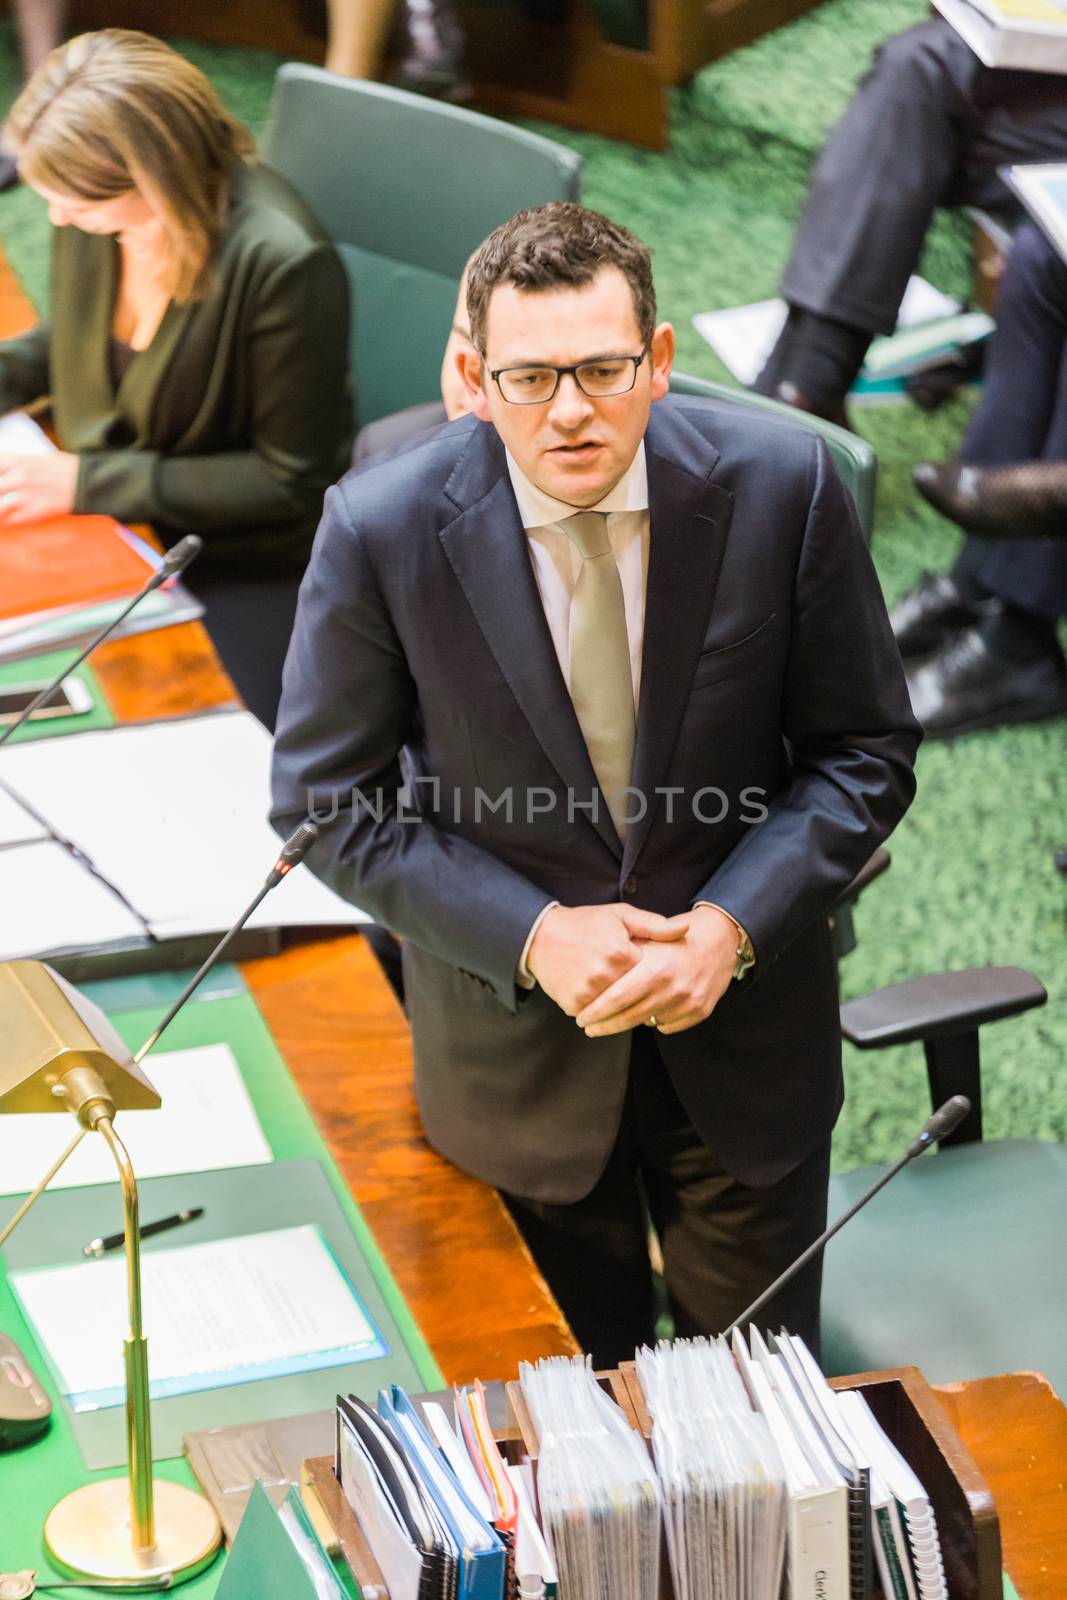 Victorian State Parliament - Question Time by davidhewison